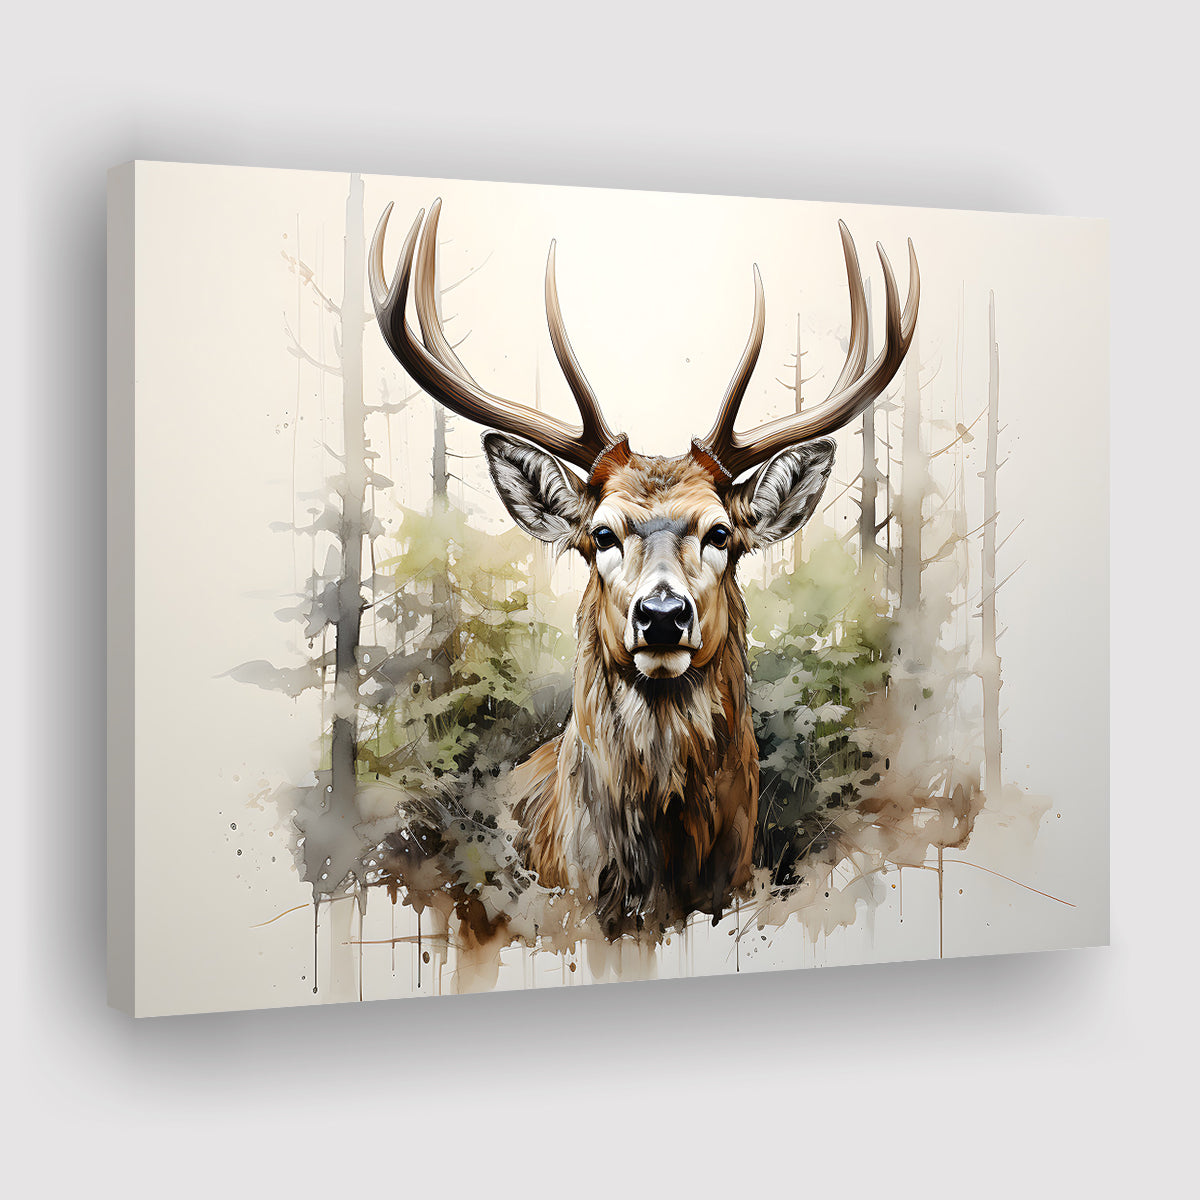 In Decor, UnixCanvas Stag Canvas Forest Home – Art Head Deer Watercolor Prints Wall